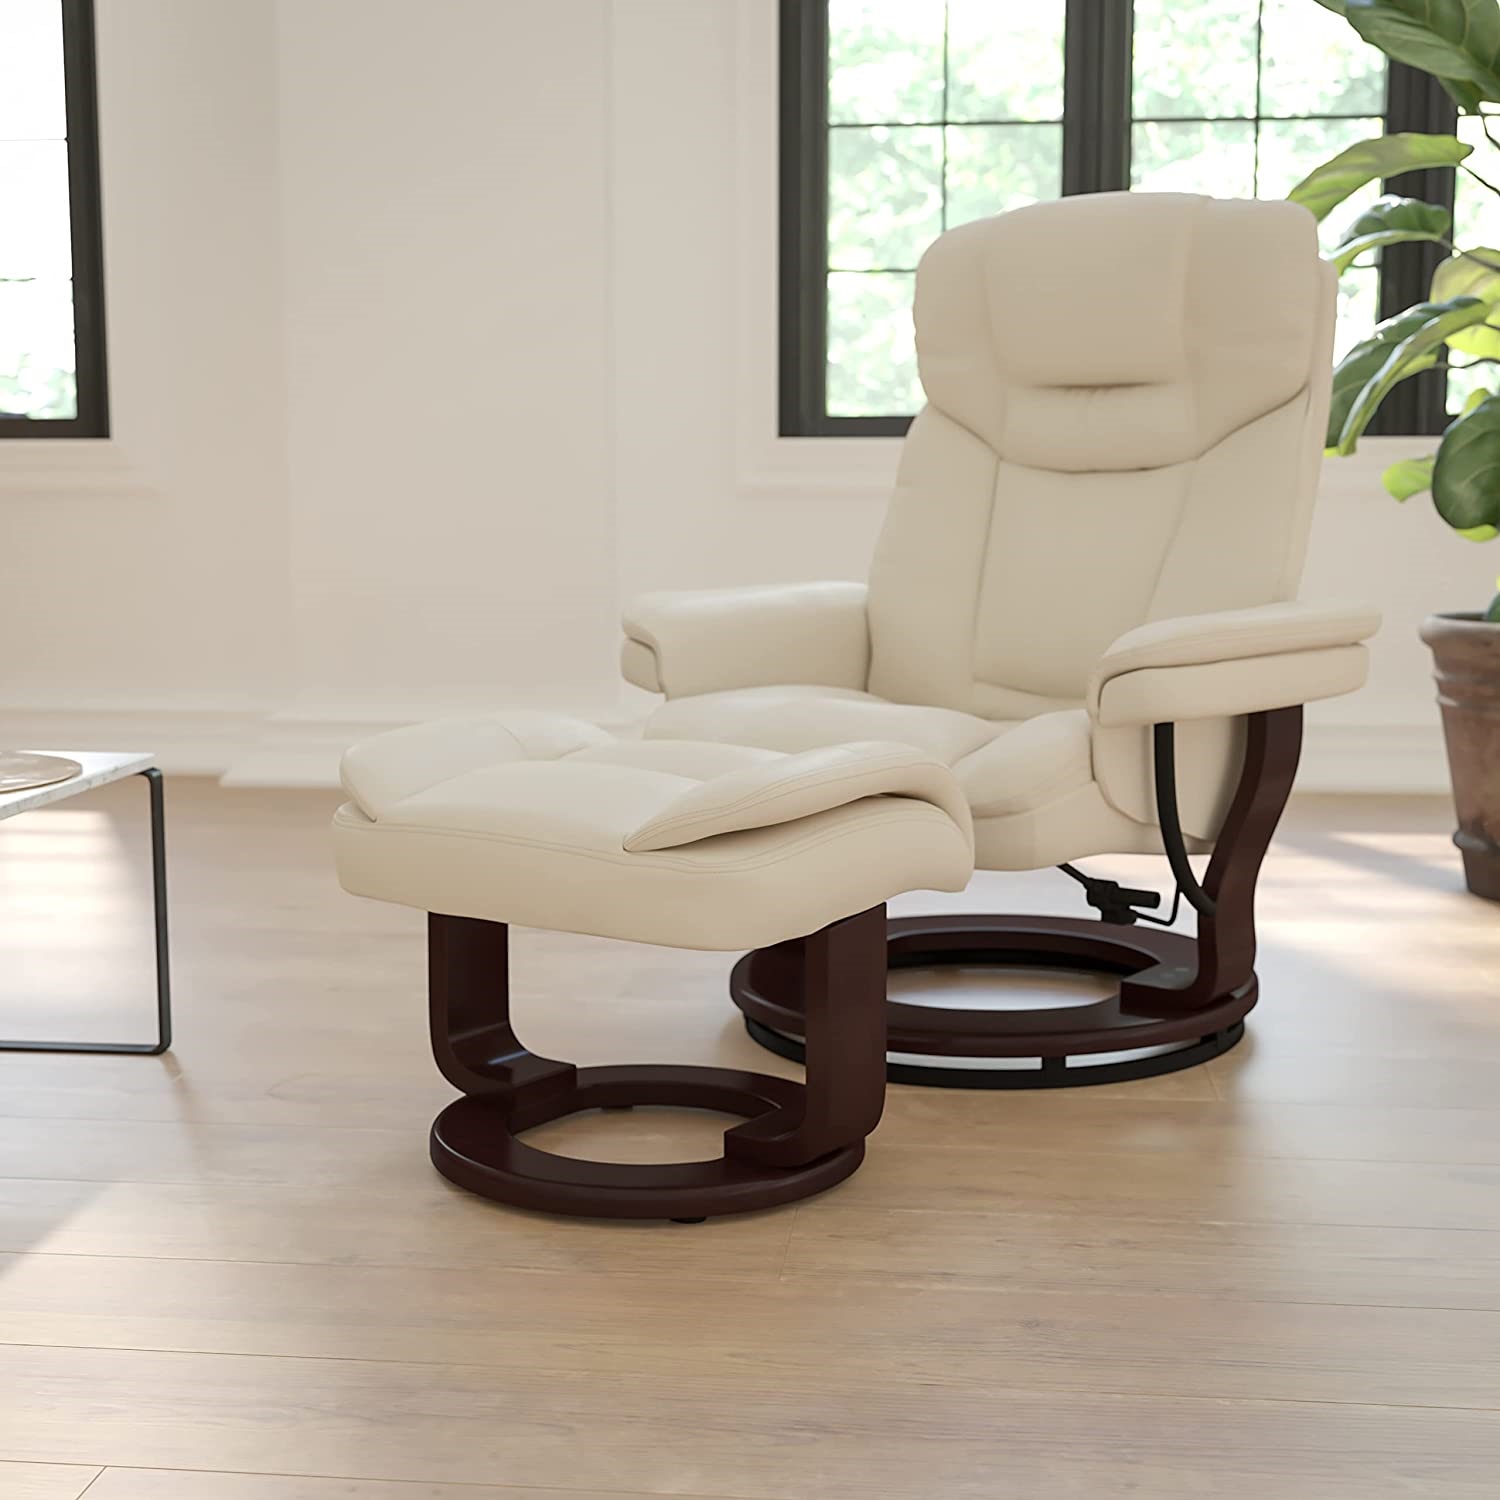 Flash Furniture Recliner Chair with Ottoman